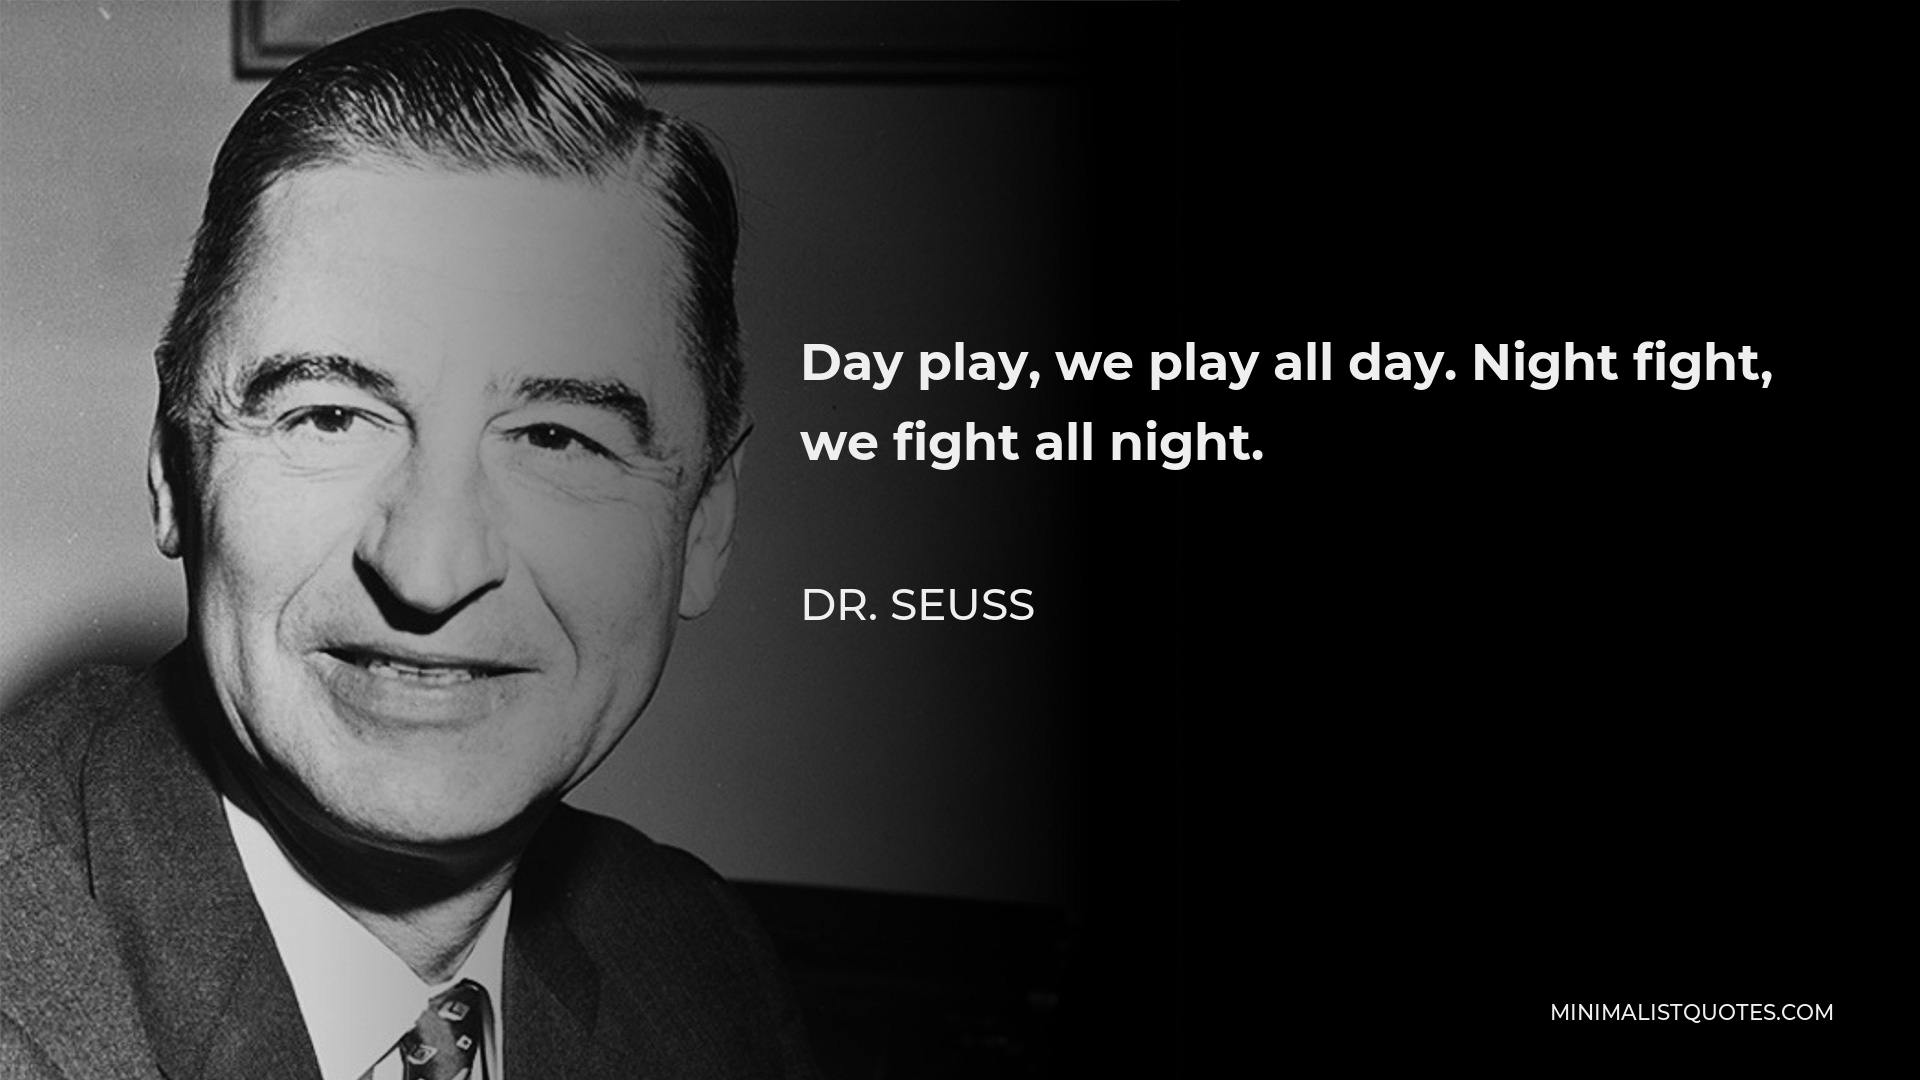 Dr. Seuss Quote - Day play, we play all day. Night fight, we fight all night.